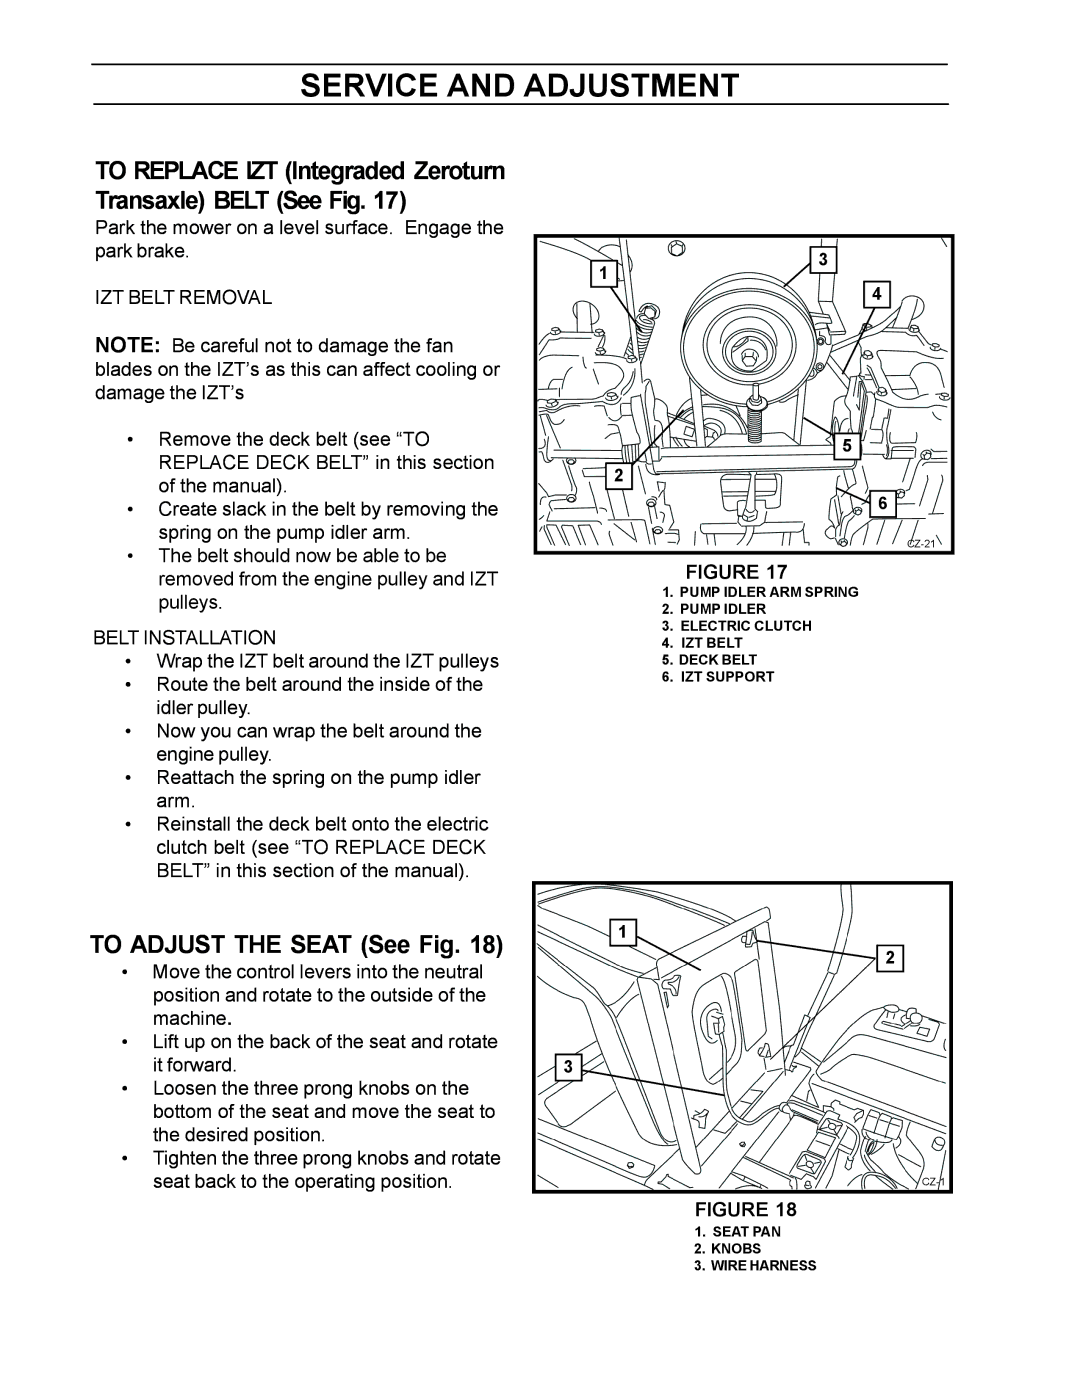 Husqvarna 968999250, Z4818BIA manual To Adjust the Seat See Fig, To Replace IZT Integraded Zeroturn Transaxle Belt See Fig 